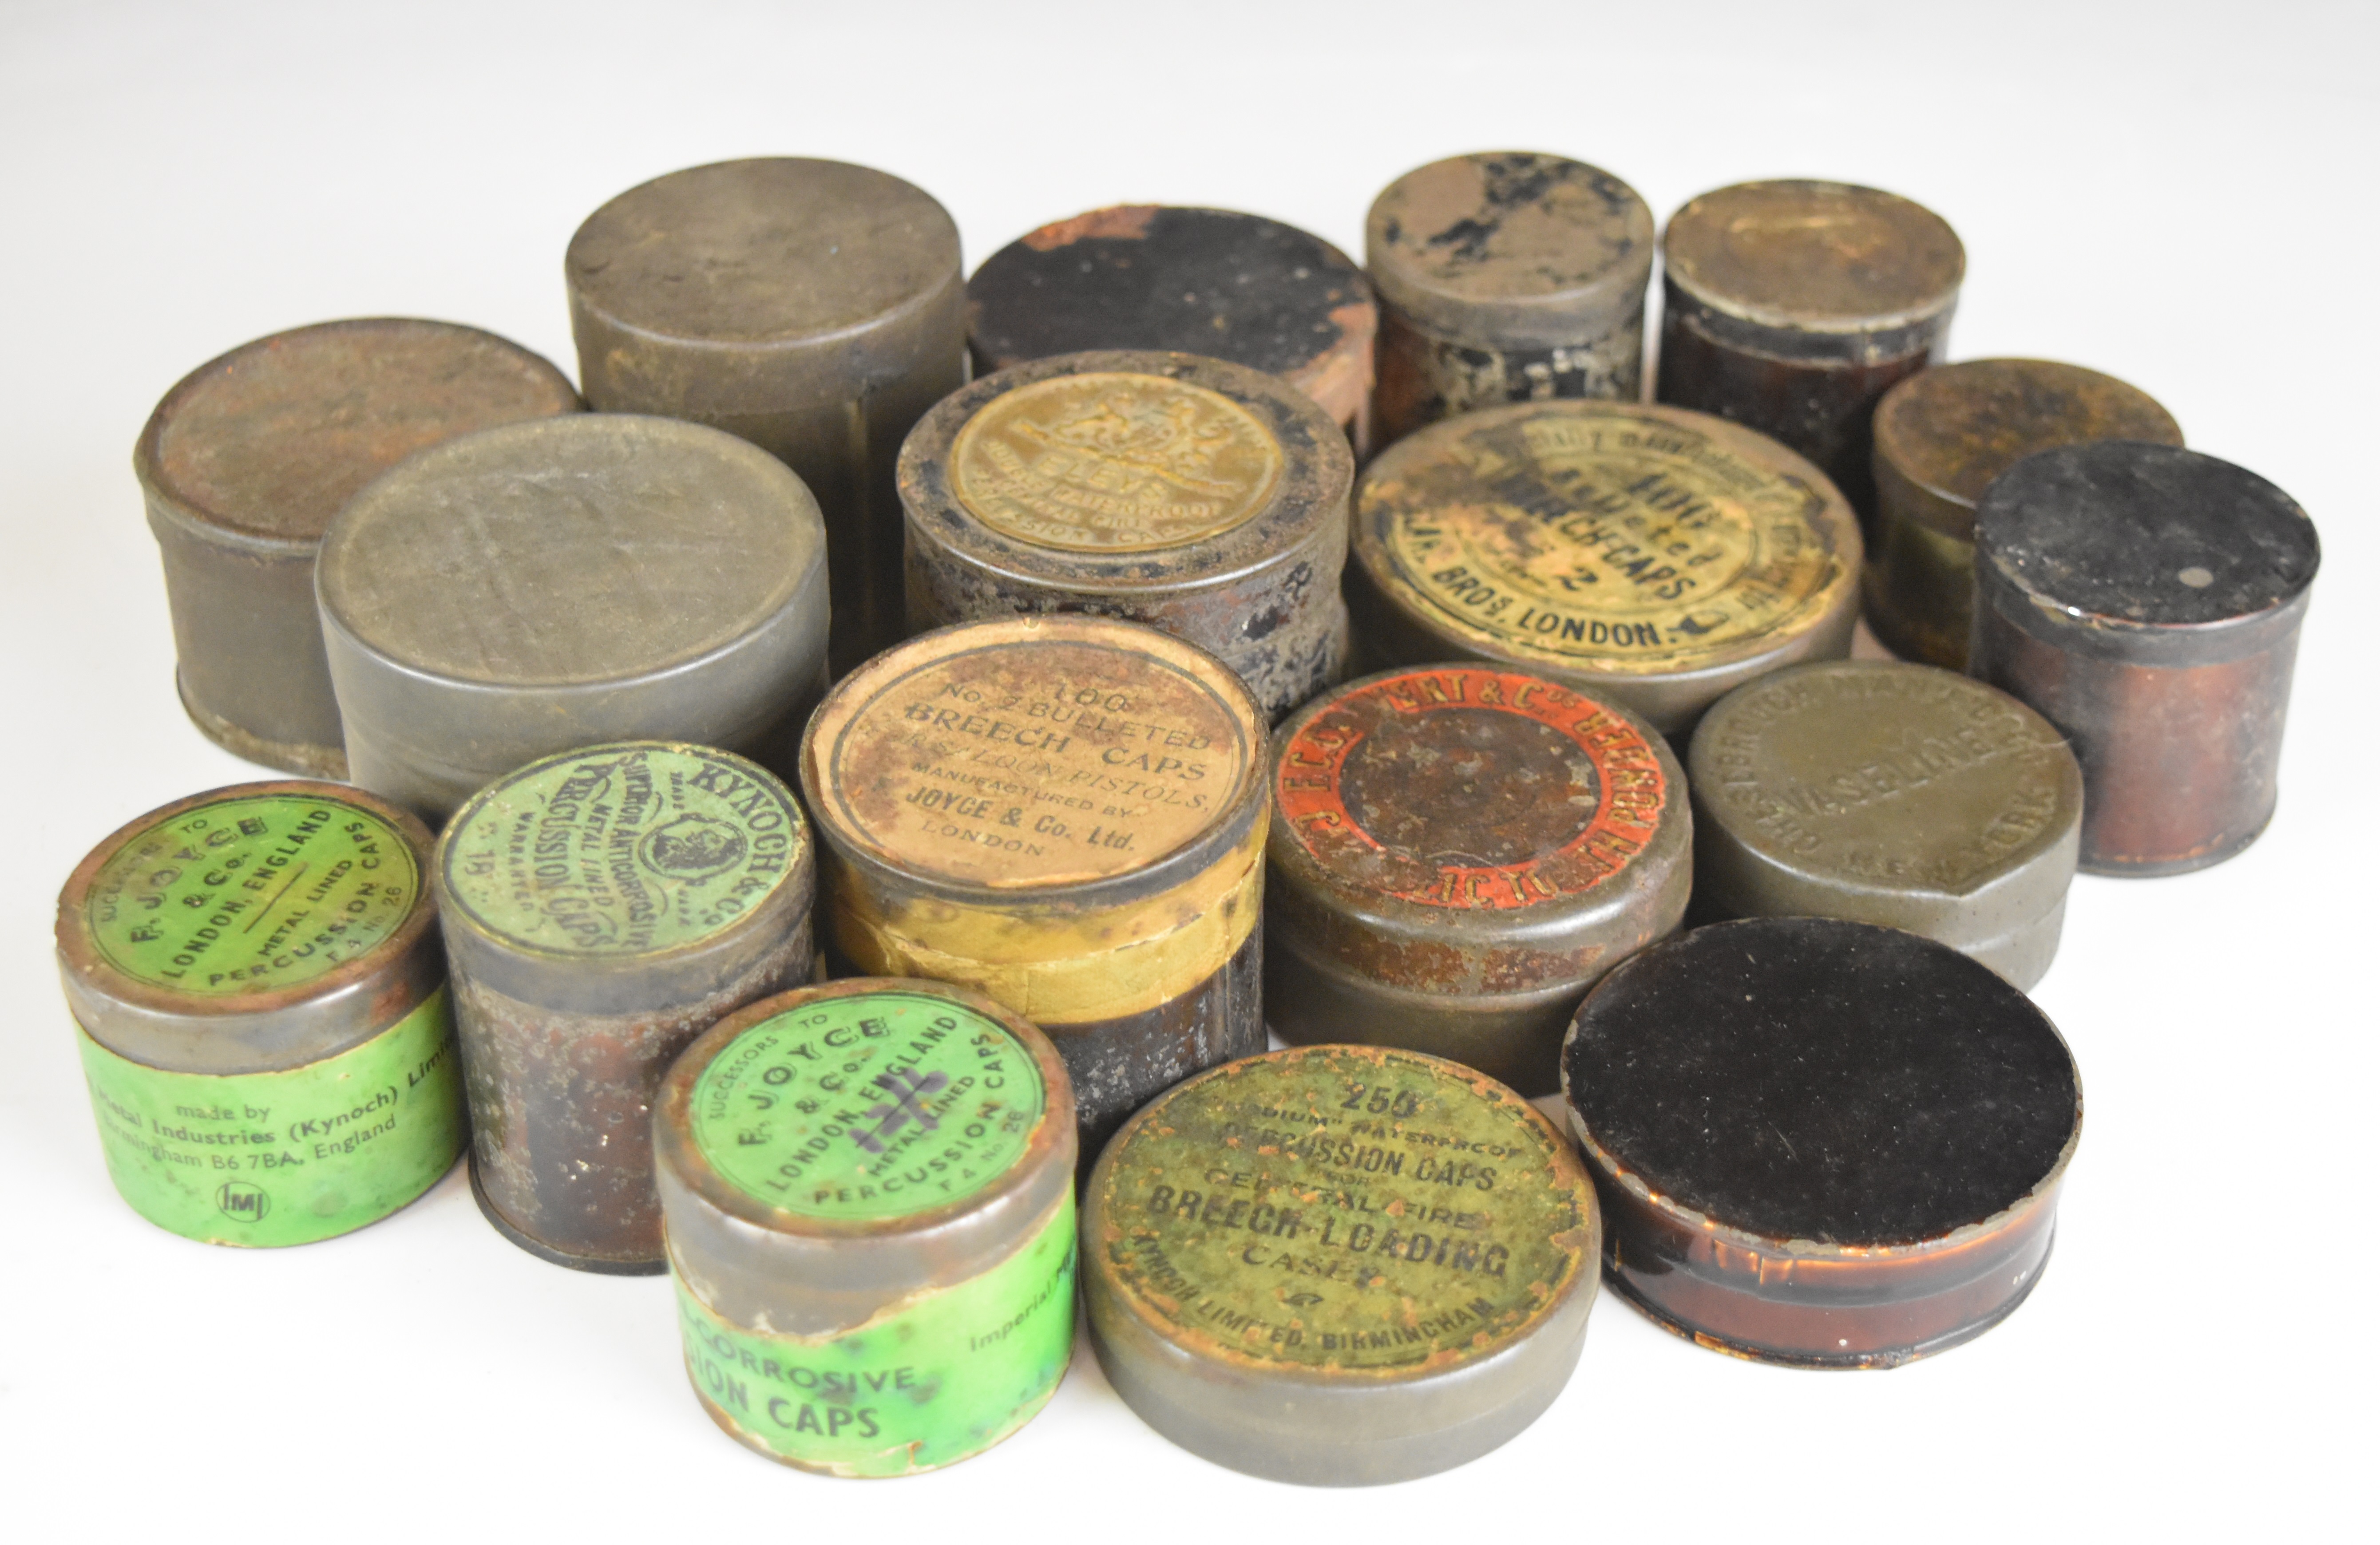 Eighteen various rifle or pistol percussion cap and similar tins come with original labels including